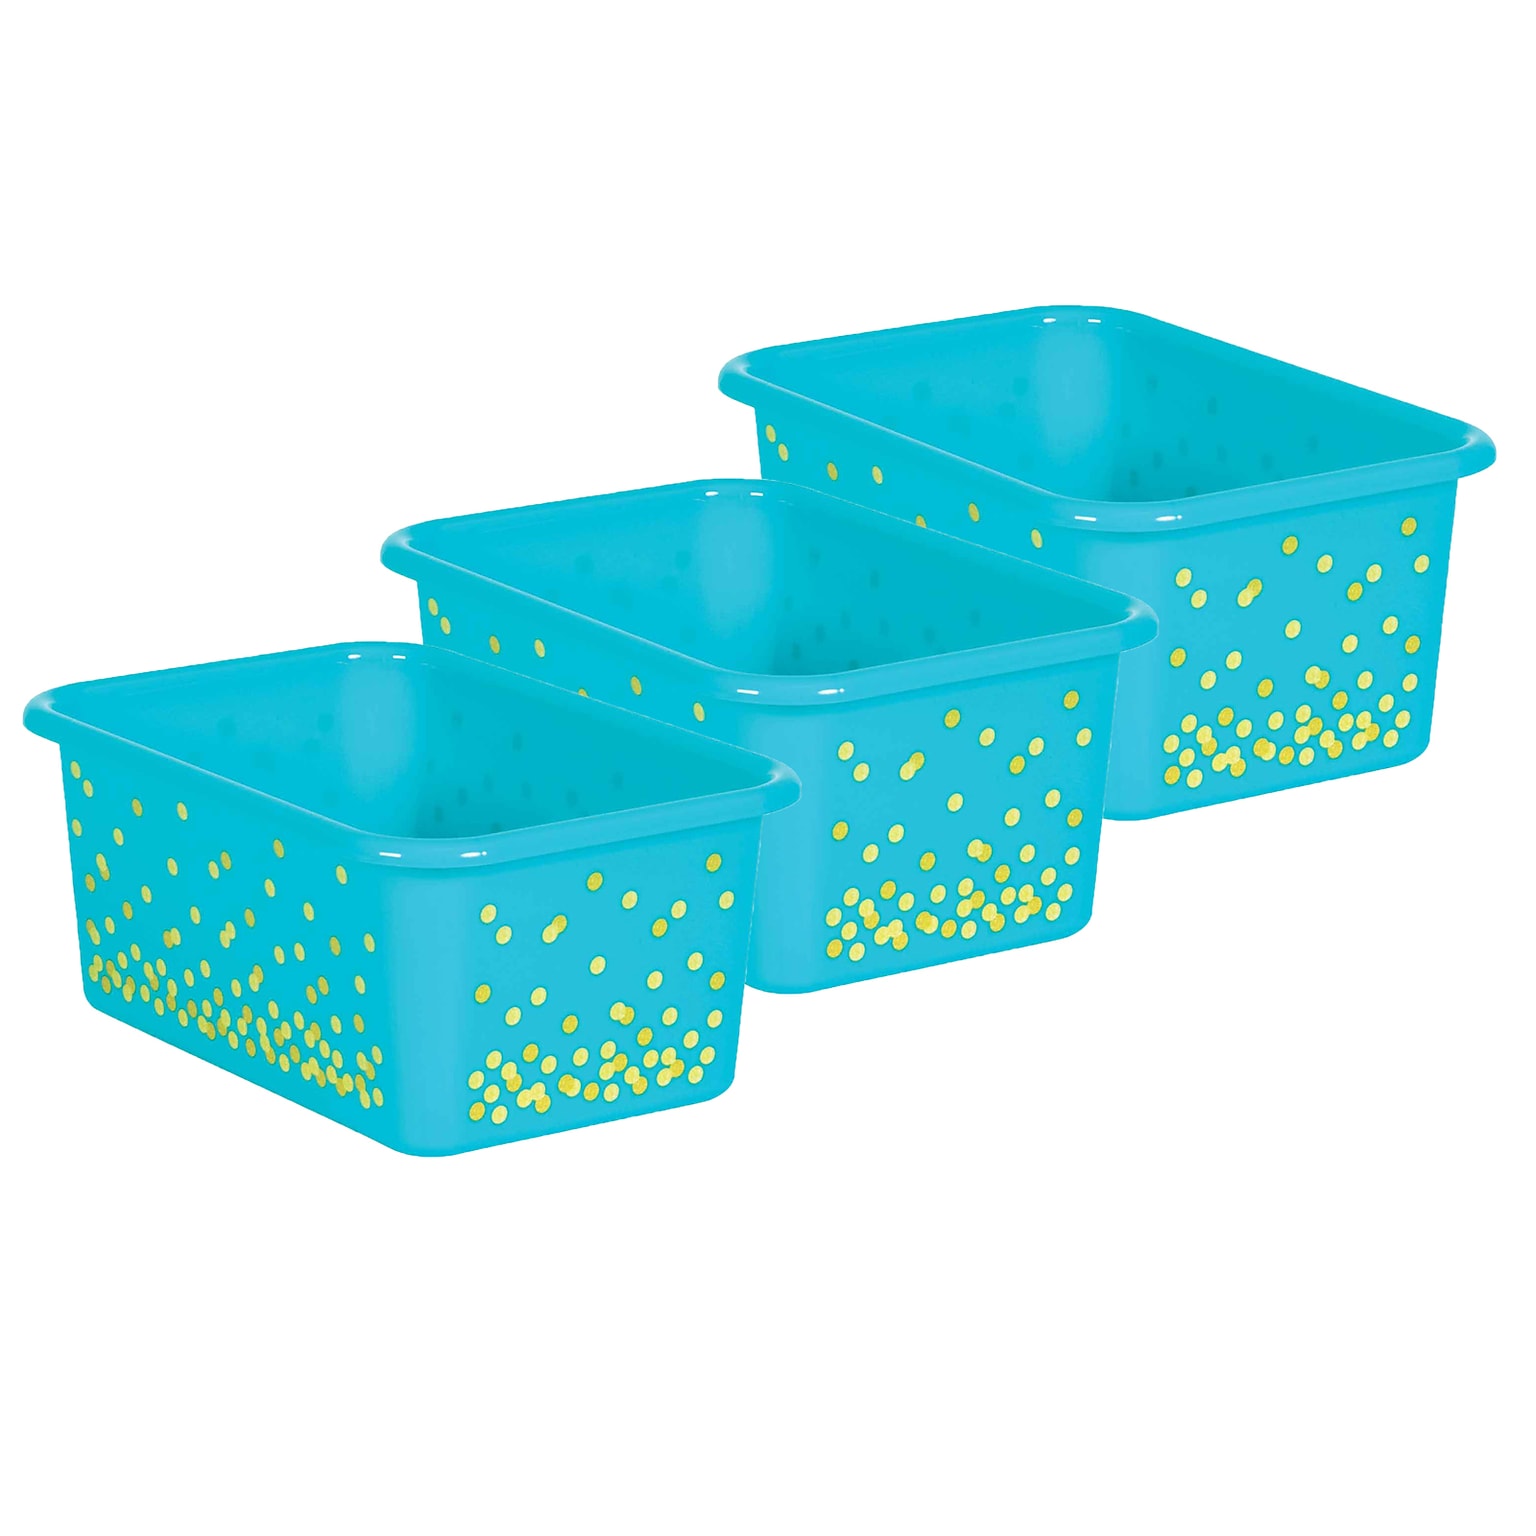 Teacher Created Resources Plastic Storage Bin, Small, 7.75 x 11.38 x 5, Teal Confetti, Pack of 3 (TCR20893-3)